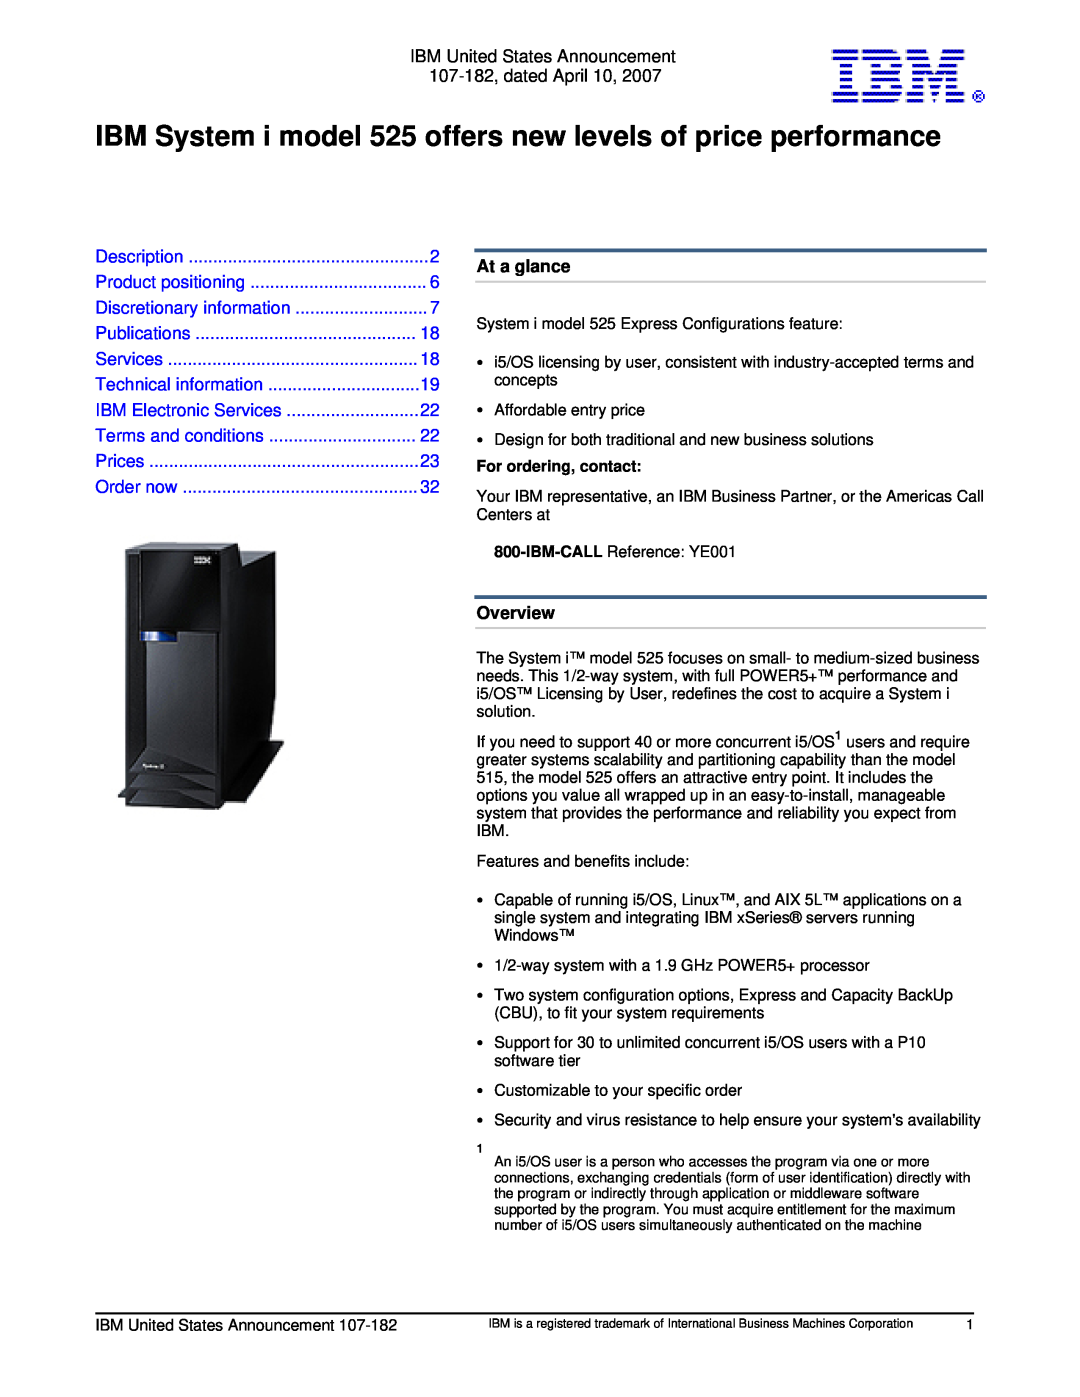 IBM manual At a glance, Overview, For ordering, contact, IBM System i model 525 offers new levels of price performance 